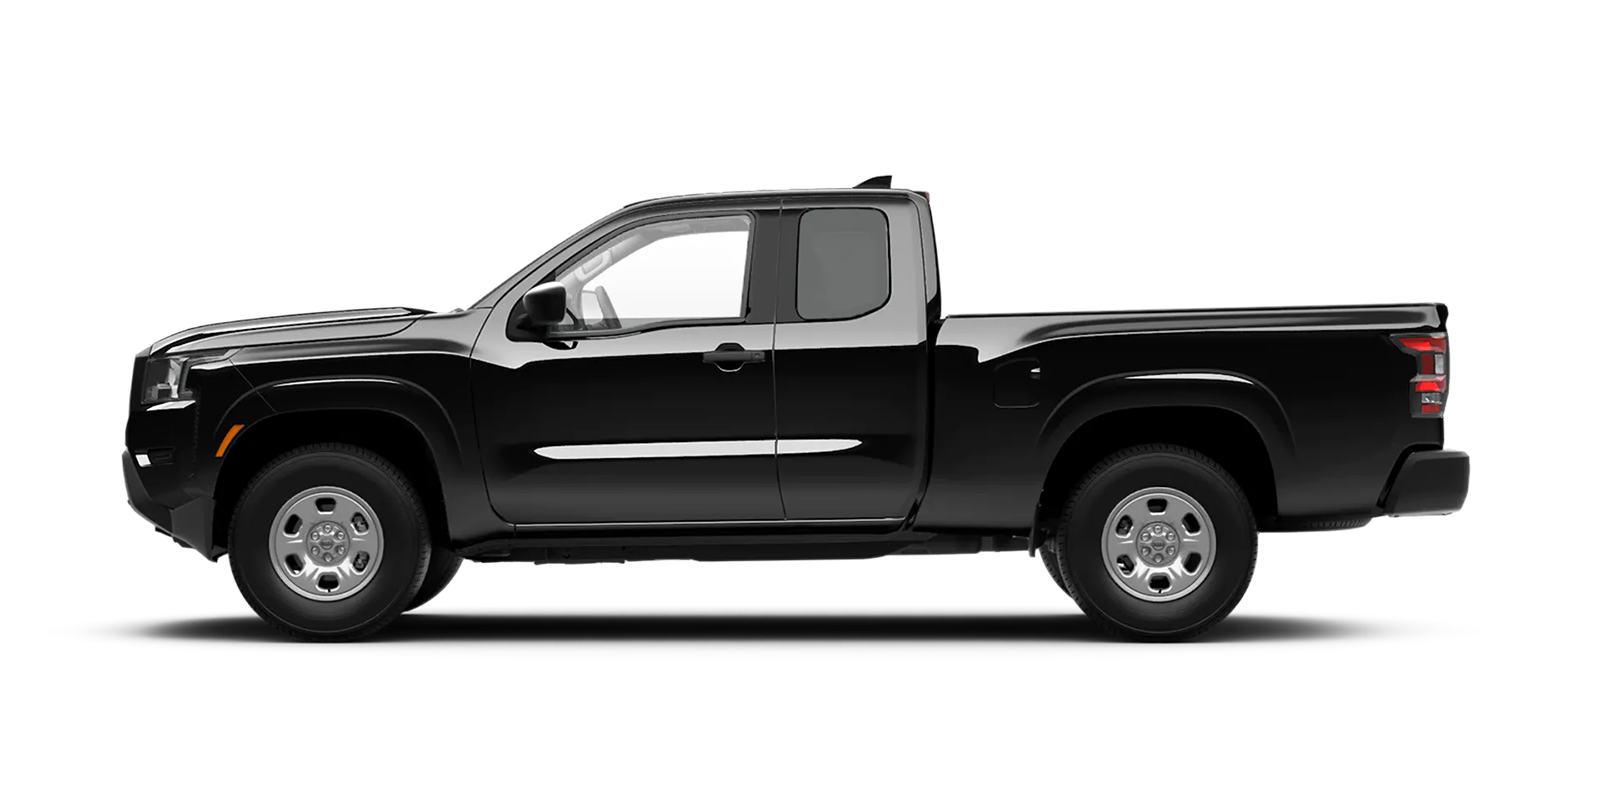 2022 Frontier King Cab S 4x4 in Super Black | Alan Webb Nissan in Vancouver WA